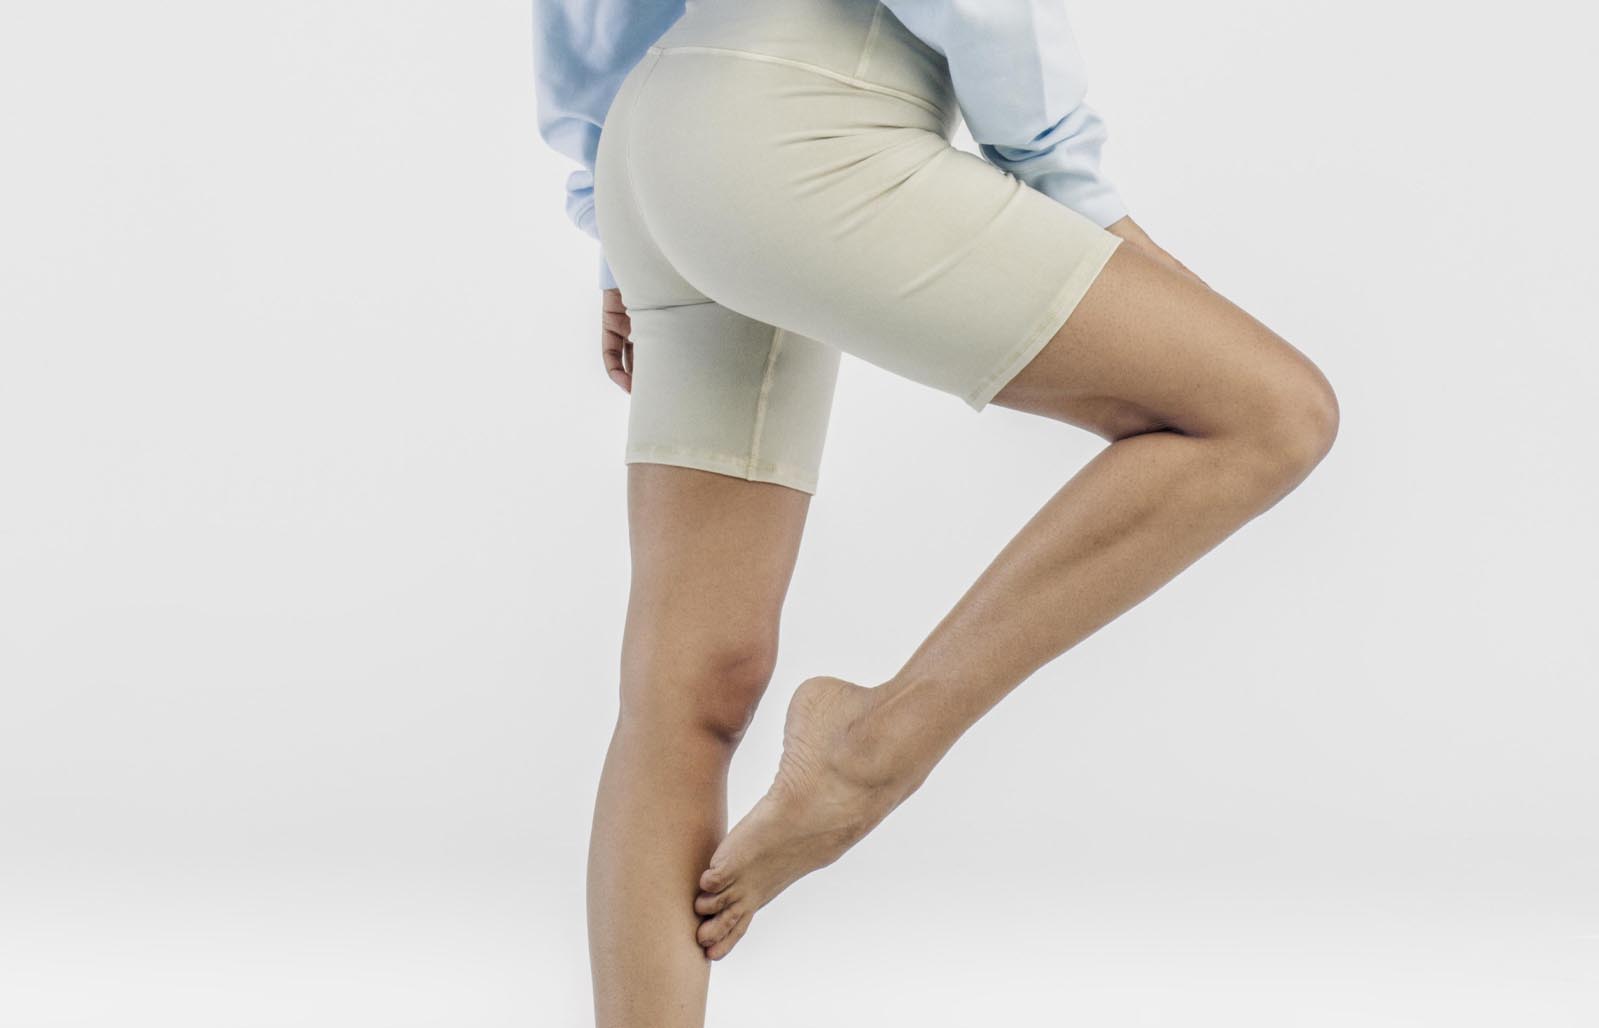 Why do I have brown spots on my Legs? — Physicians Vein Clinics